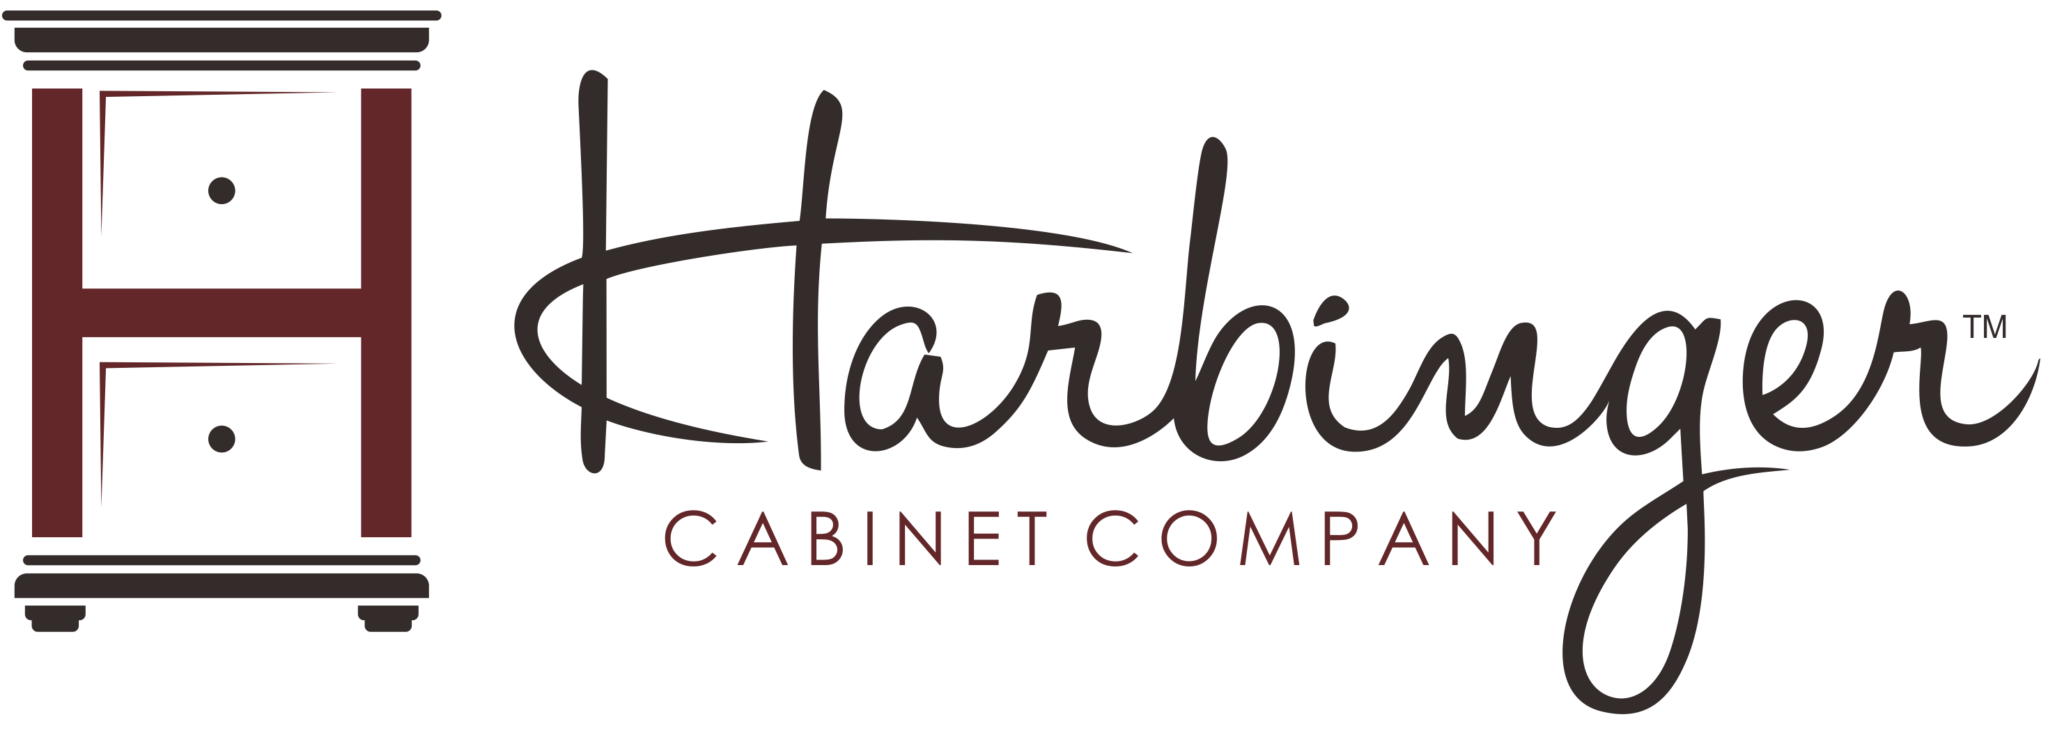 Cabinet Logo - Harbinger Cabinet Company. Wood Cabinetry Done Right